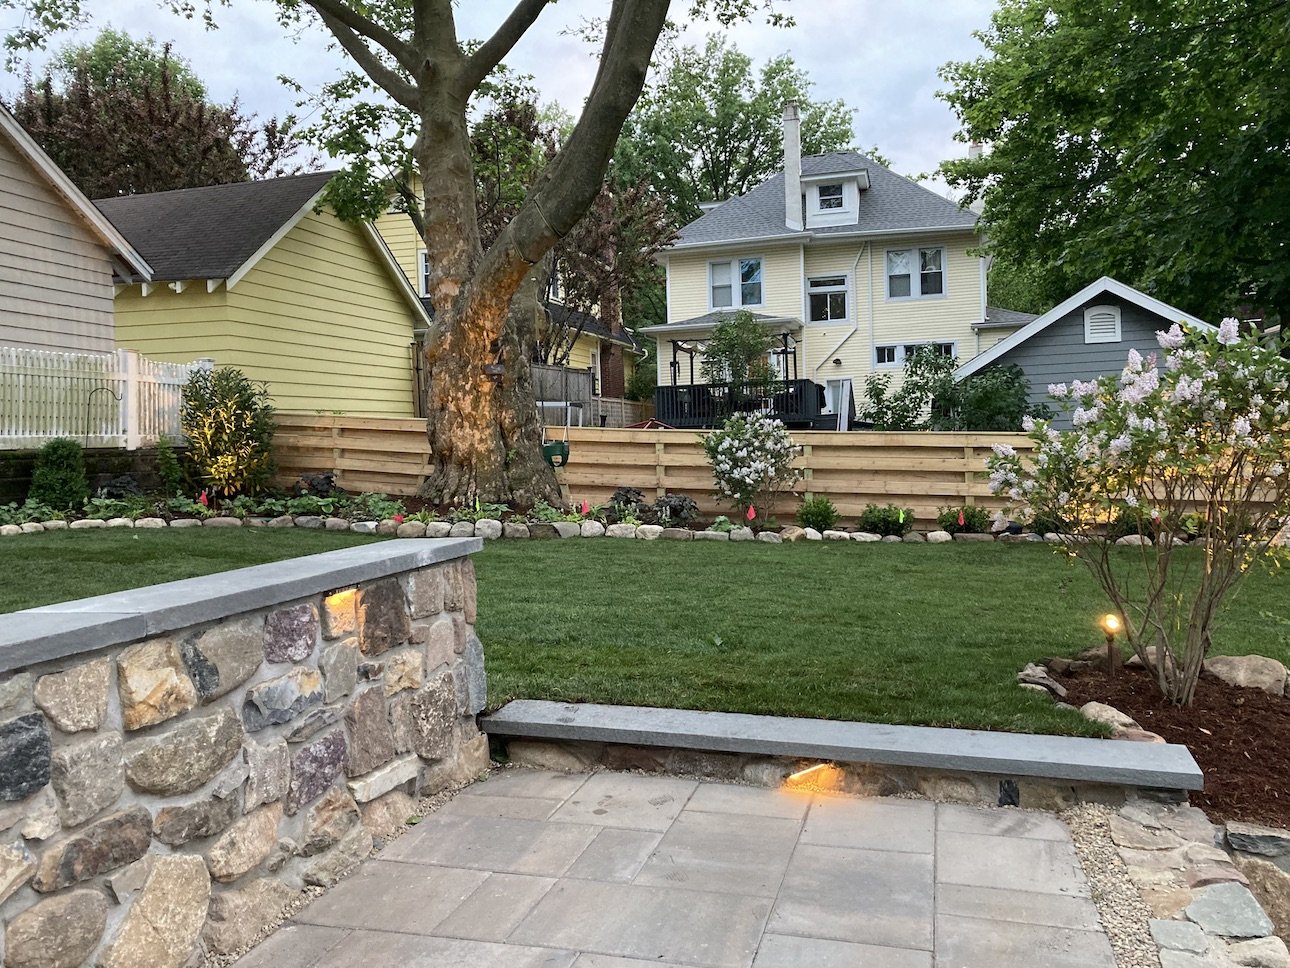 Quality natural wood fence and landscaping in south orange nj.JPEG